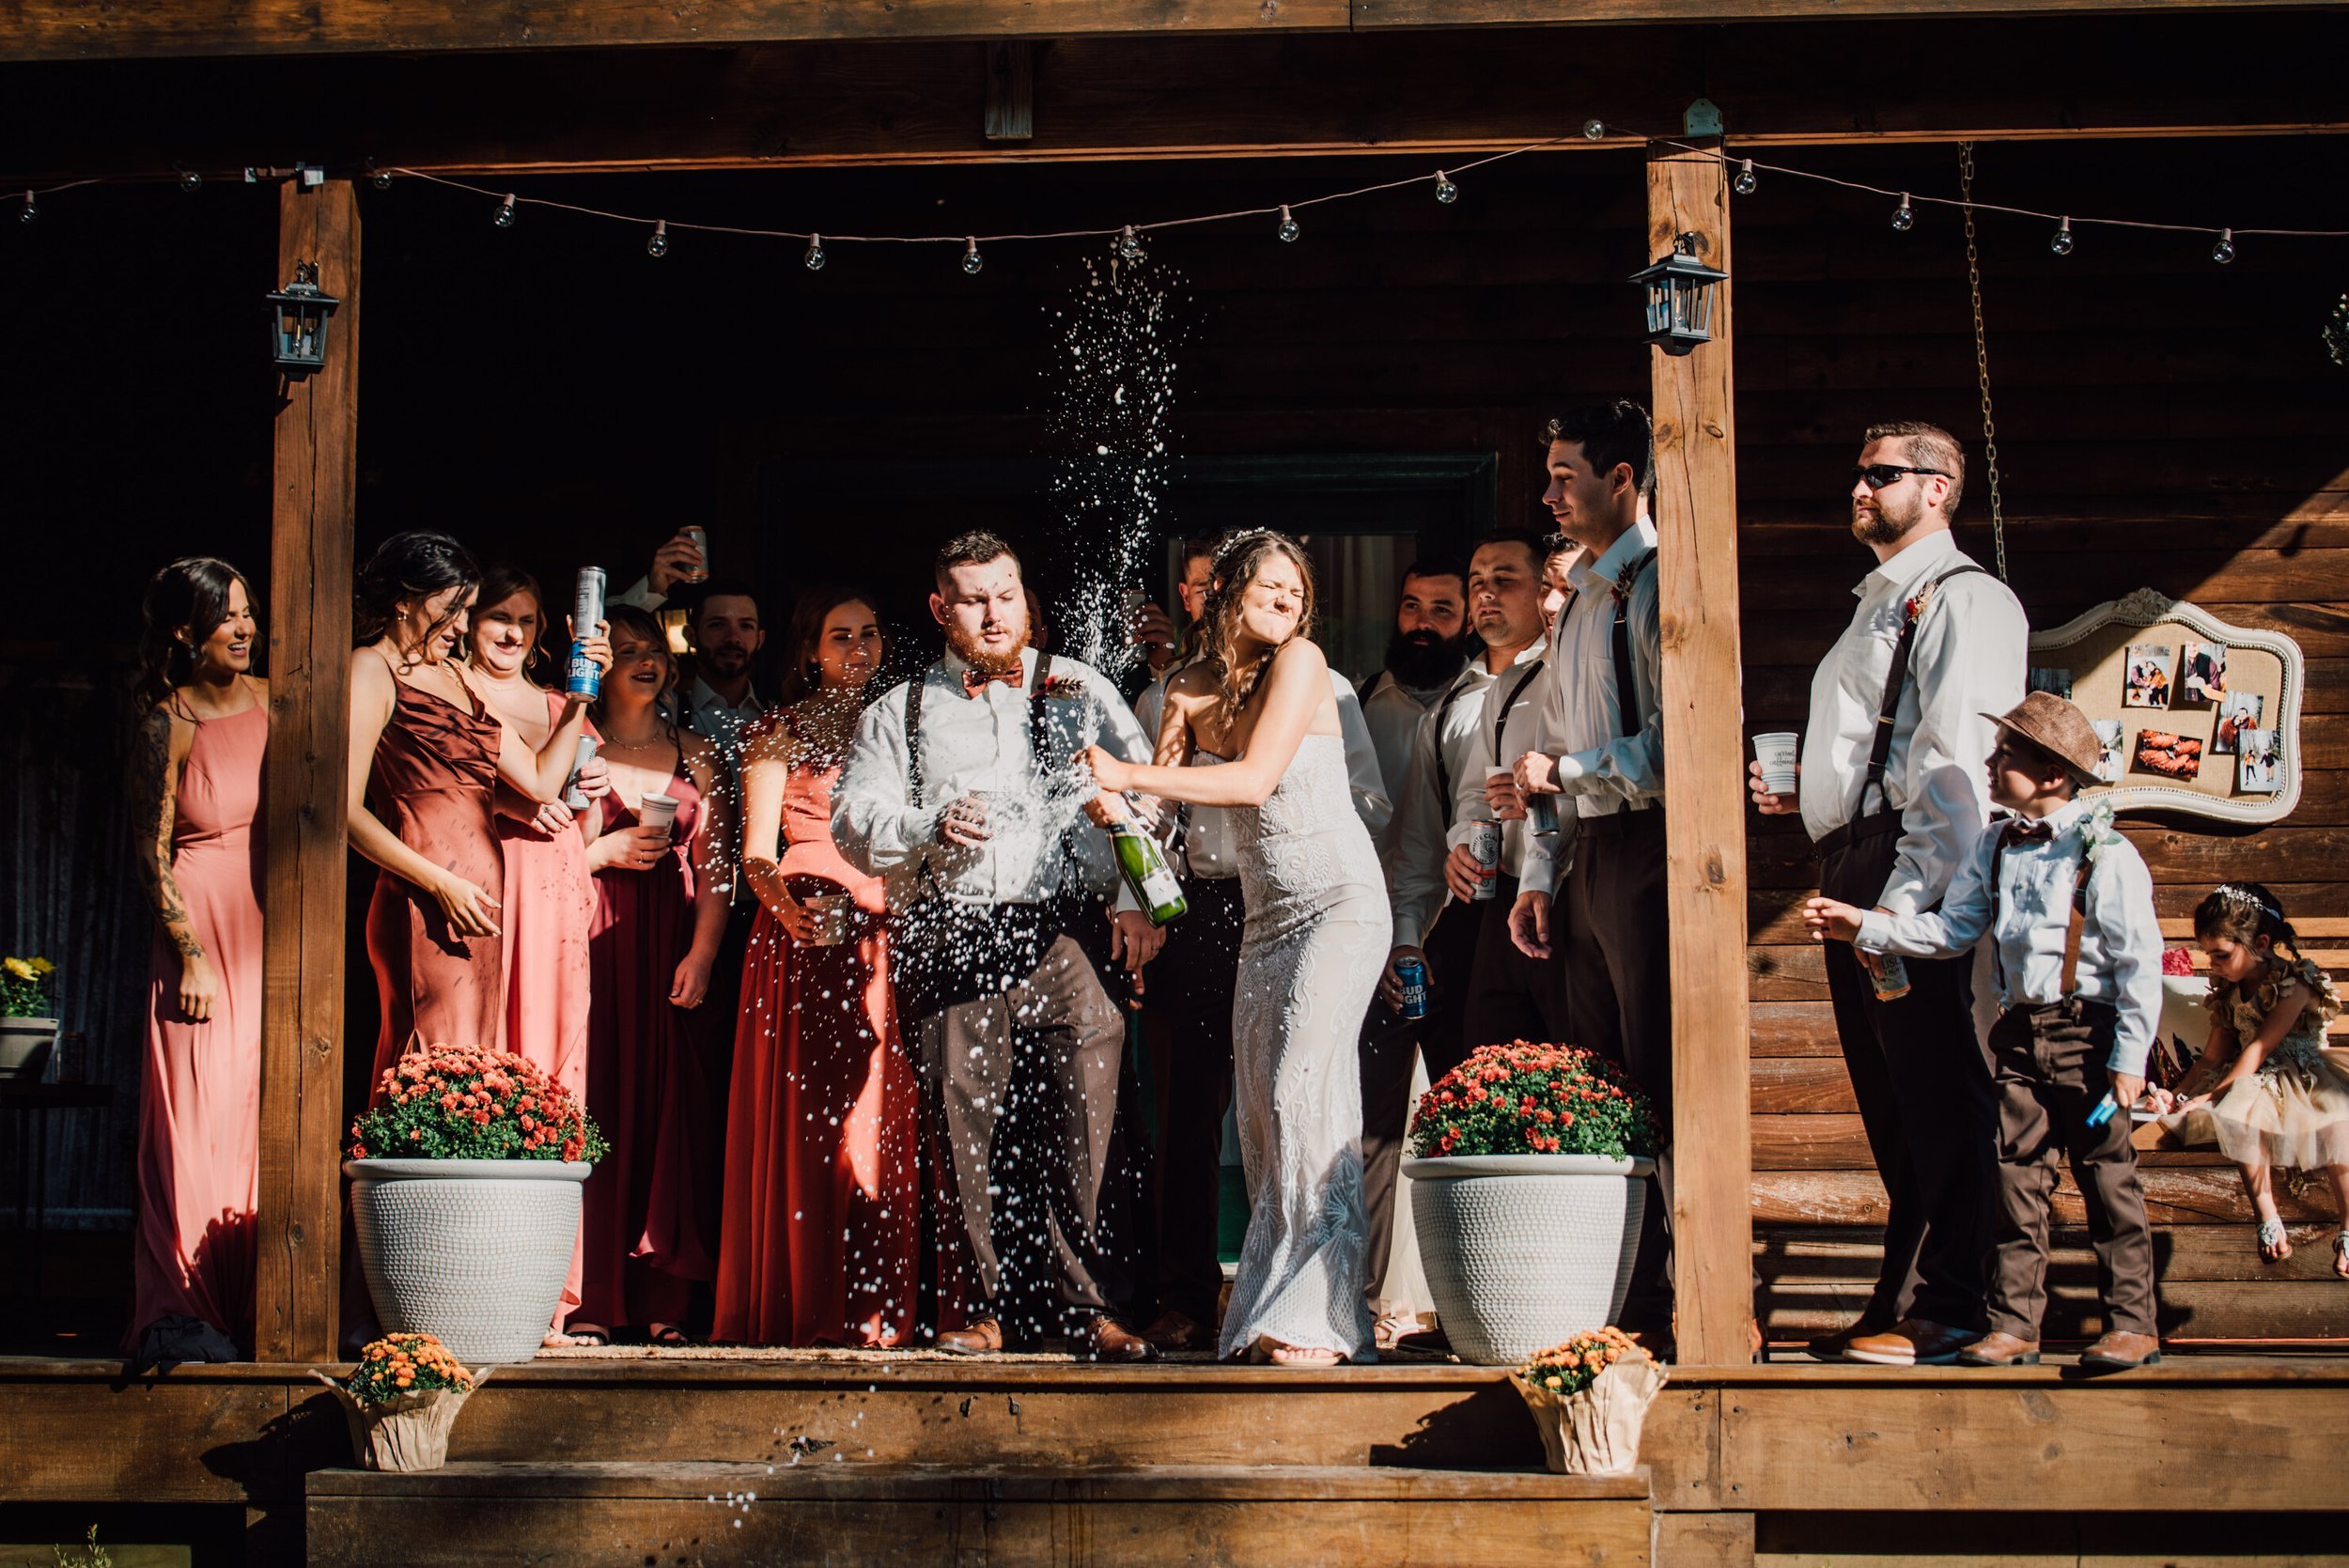  The bride pops a bottle of champagne surrounded by her wedding party after their rustic wedding ceremony 